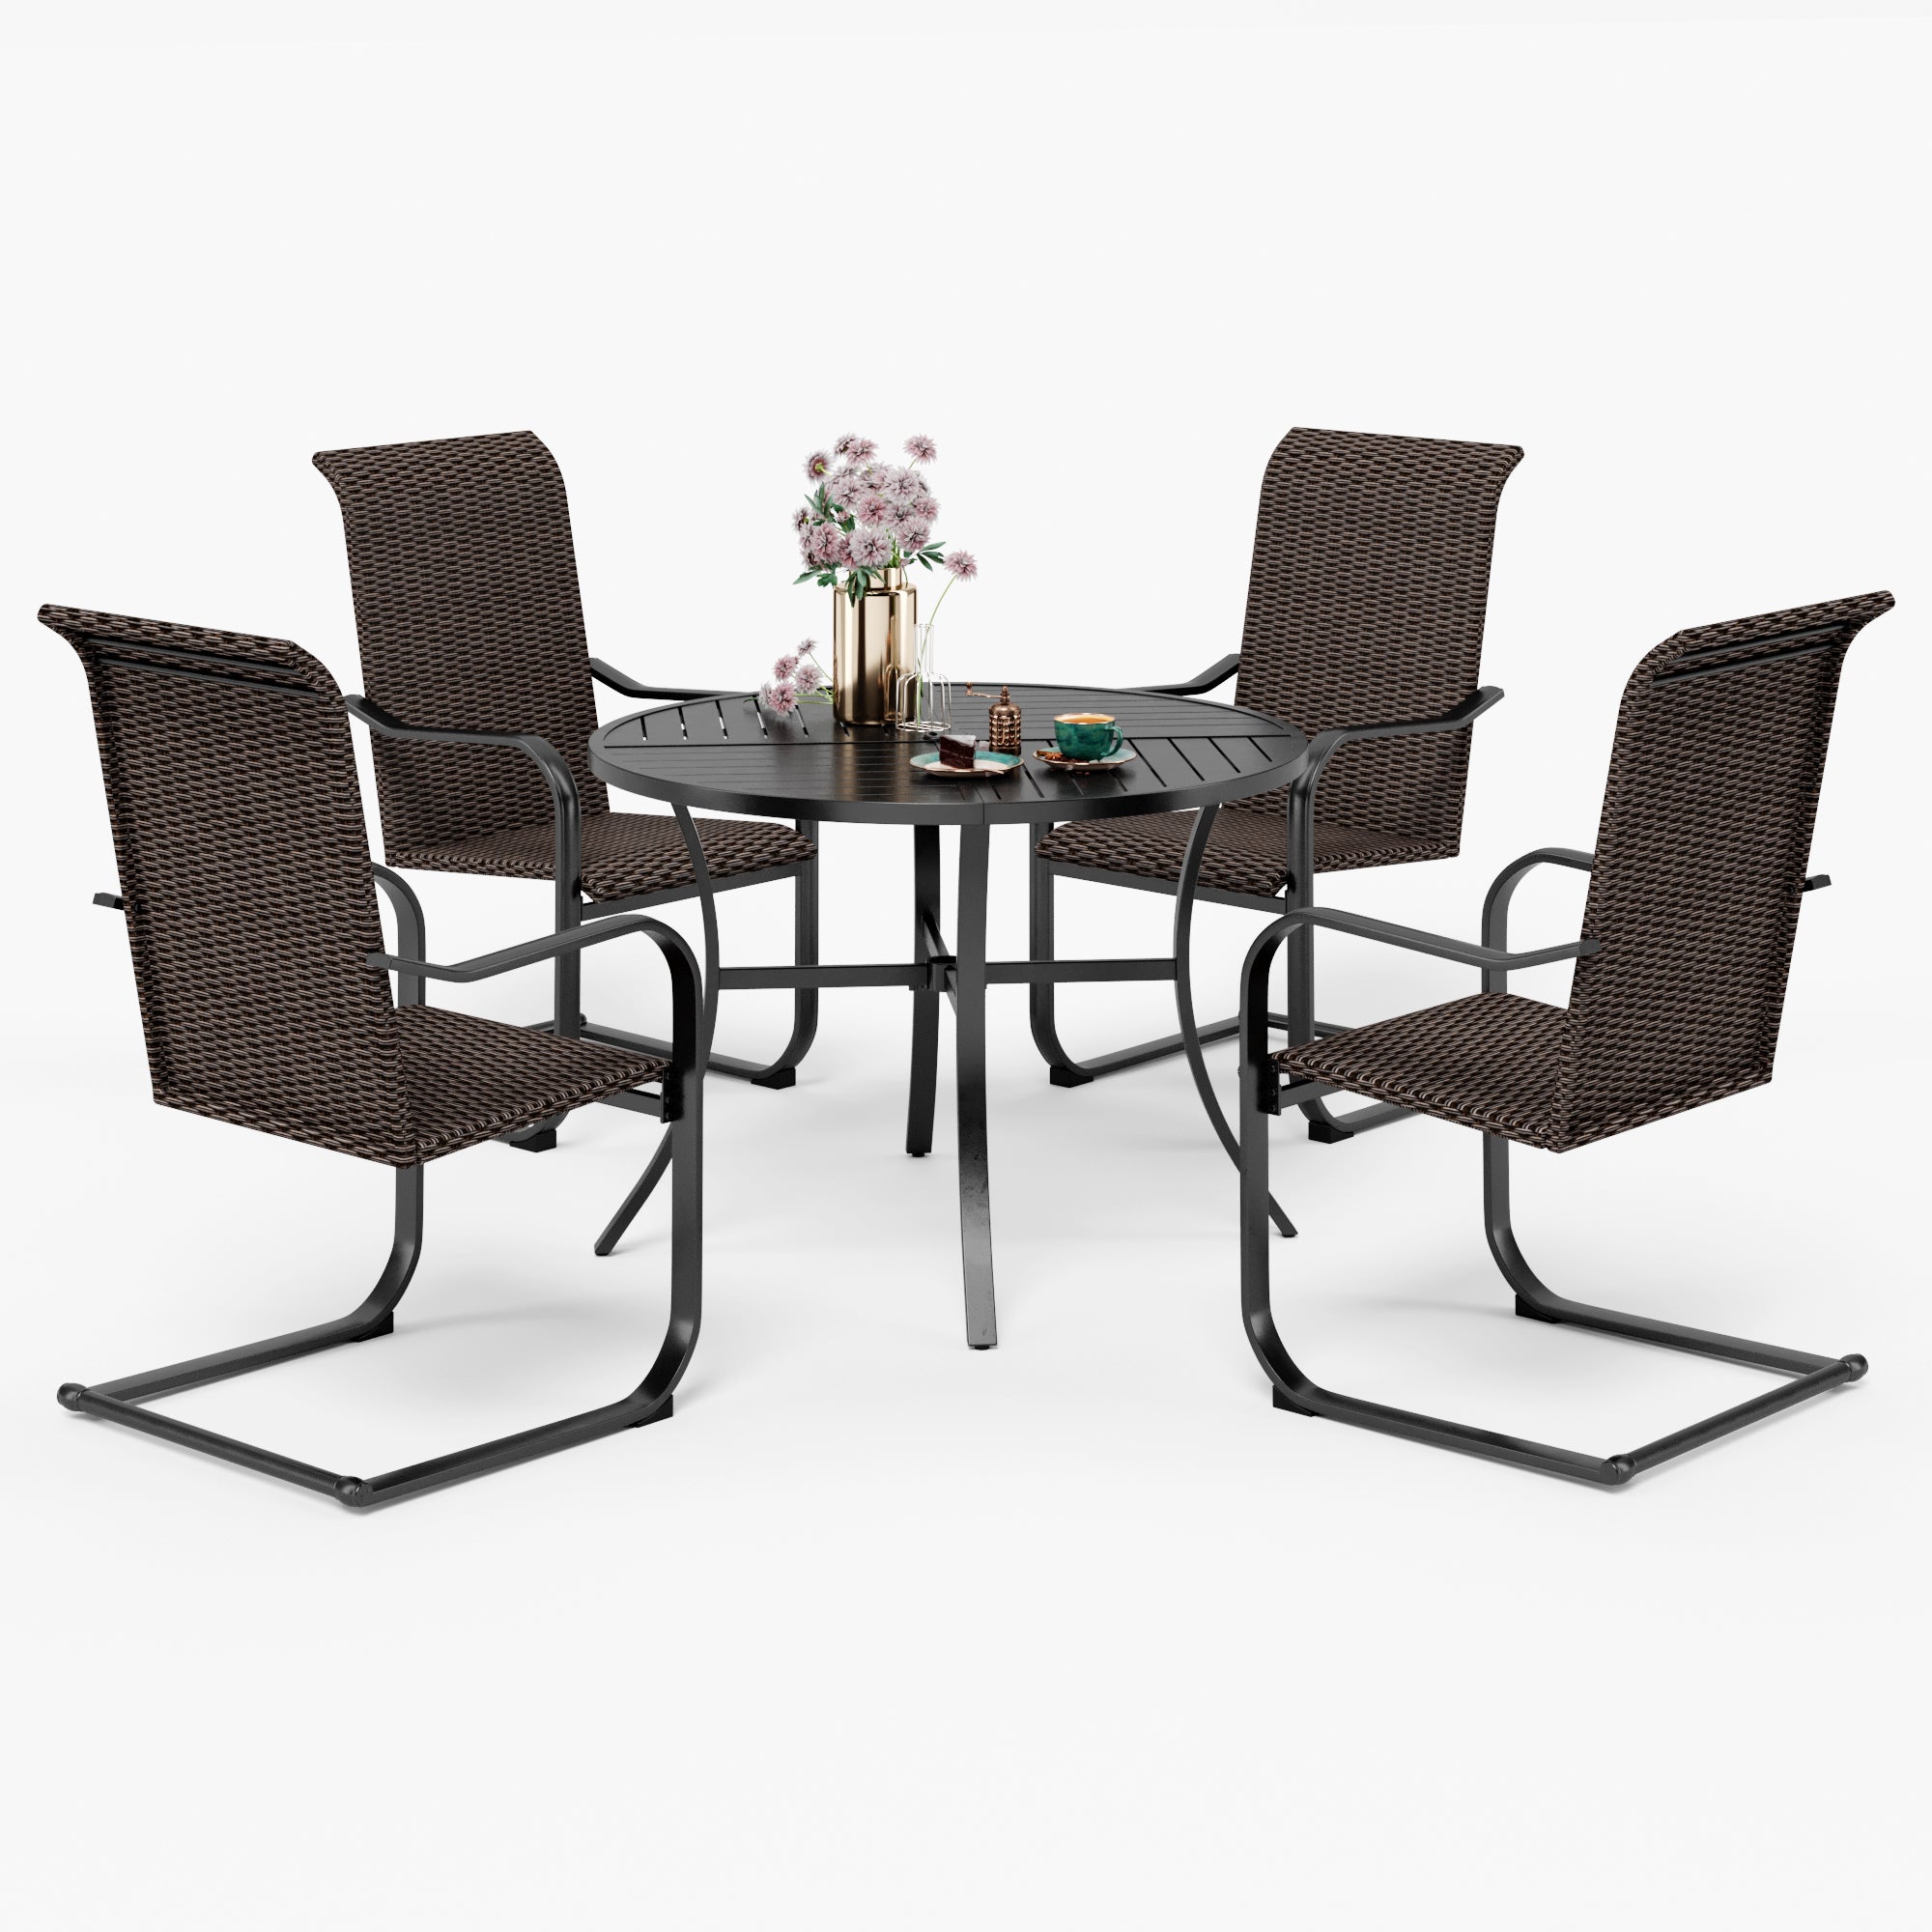 Sophia & William 5-Piece Geometrically Stamped Round Table & Rattan C-spring Chairs Outdoor Dining Set